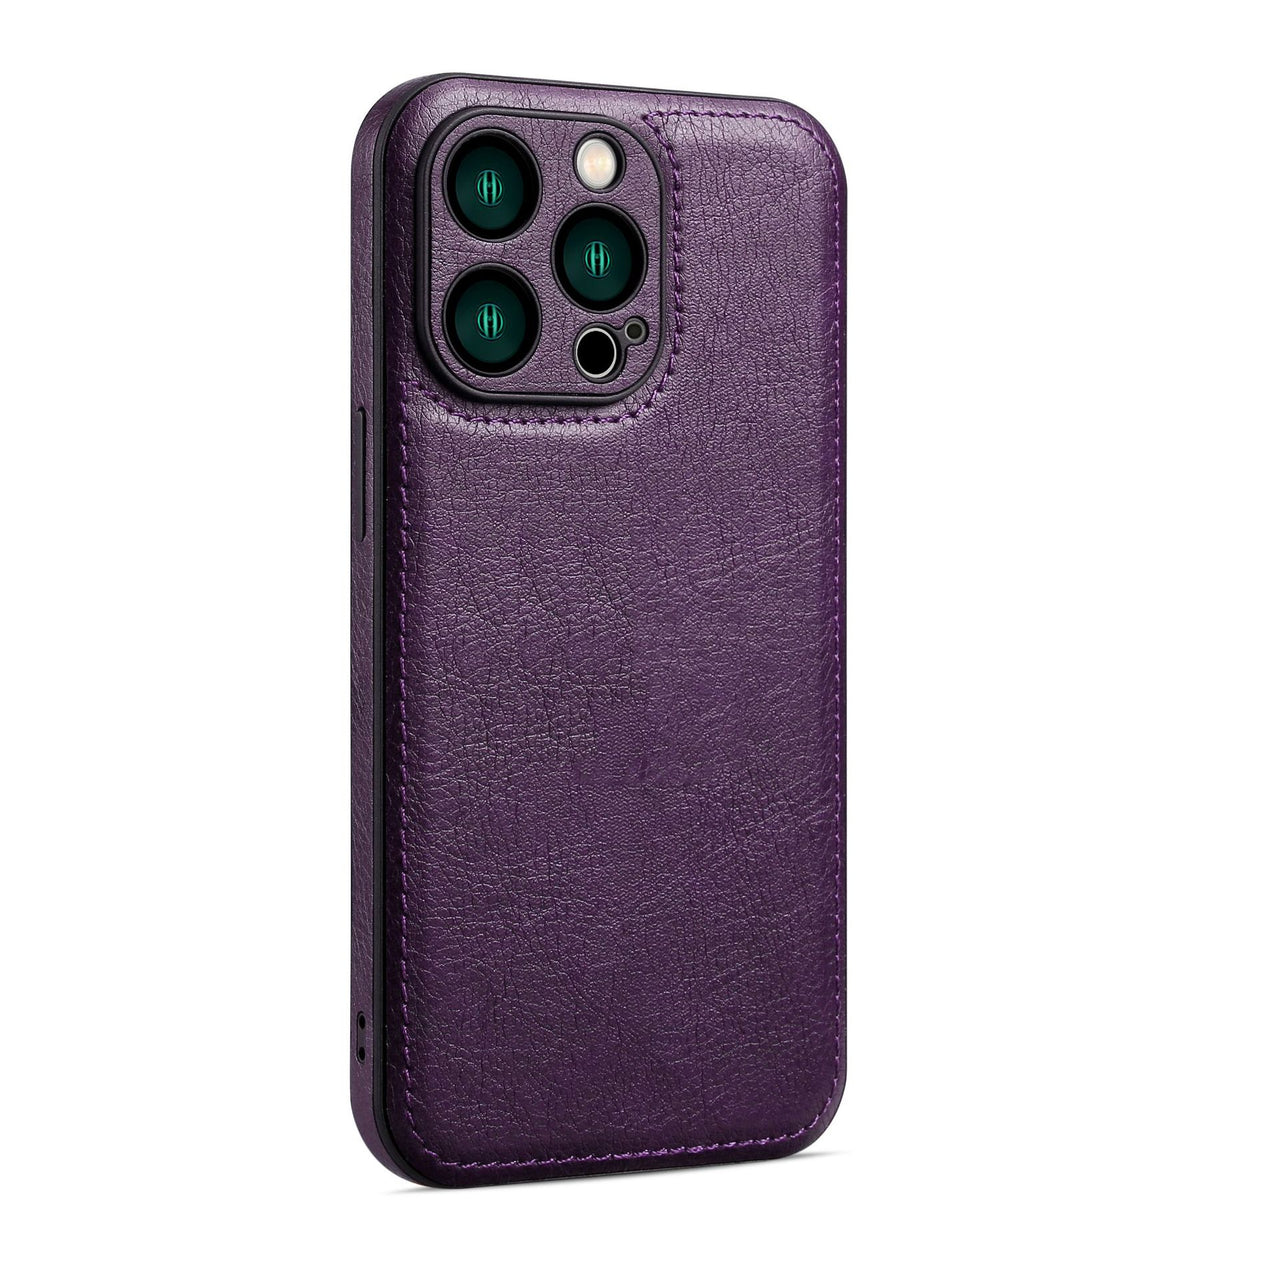 NO Designed Leather iPhone Cases